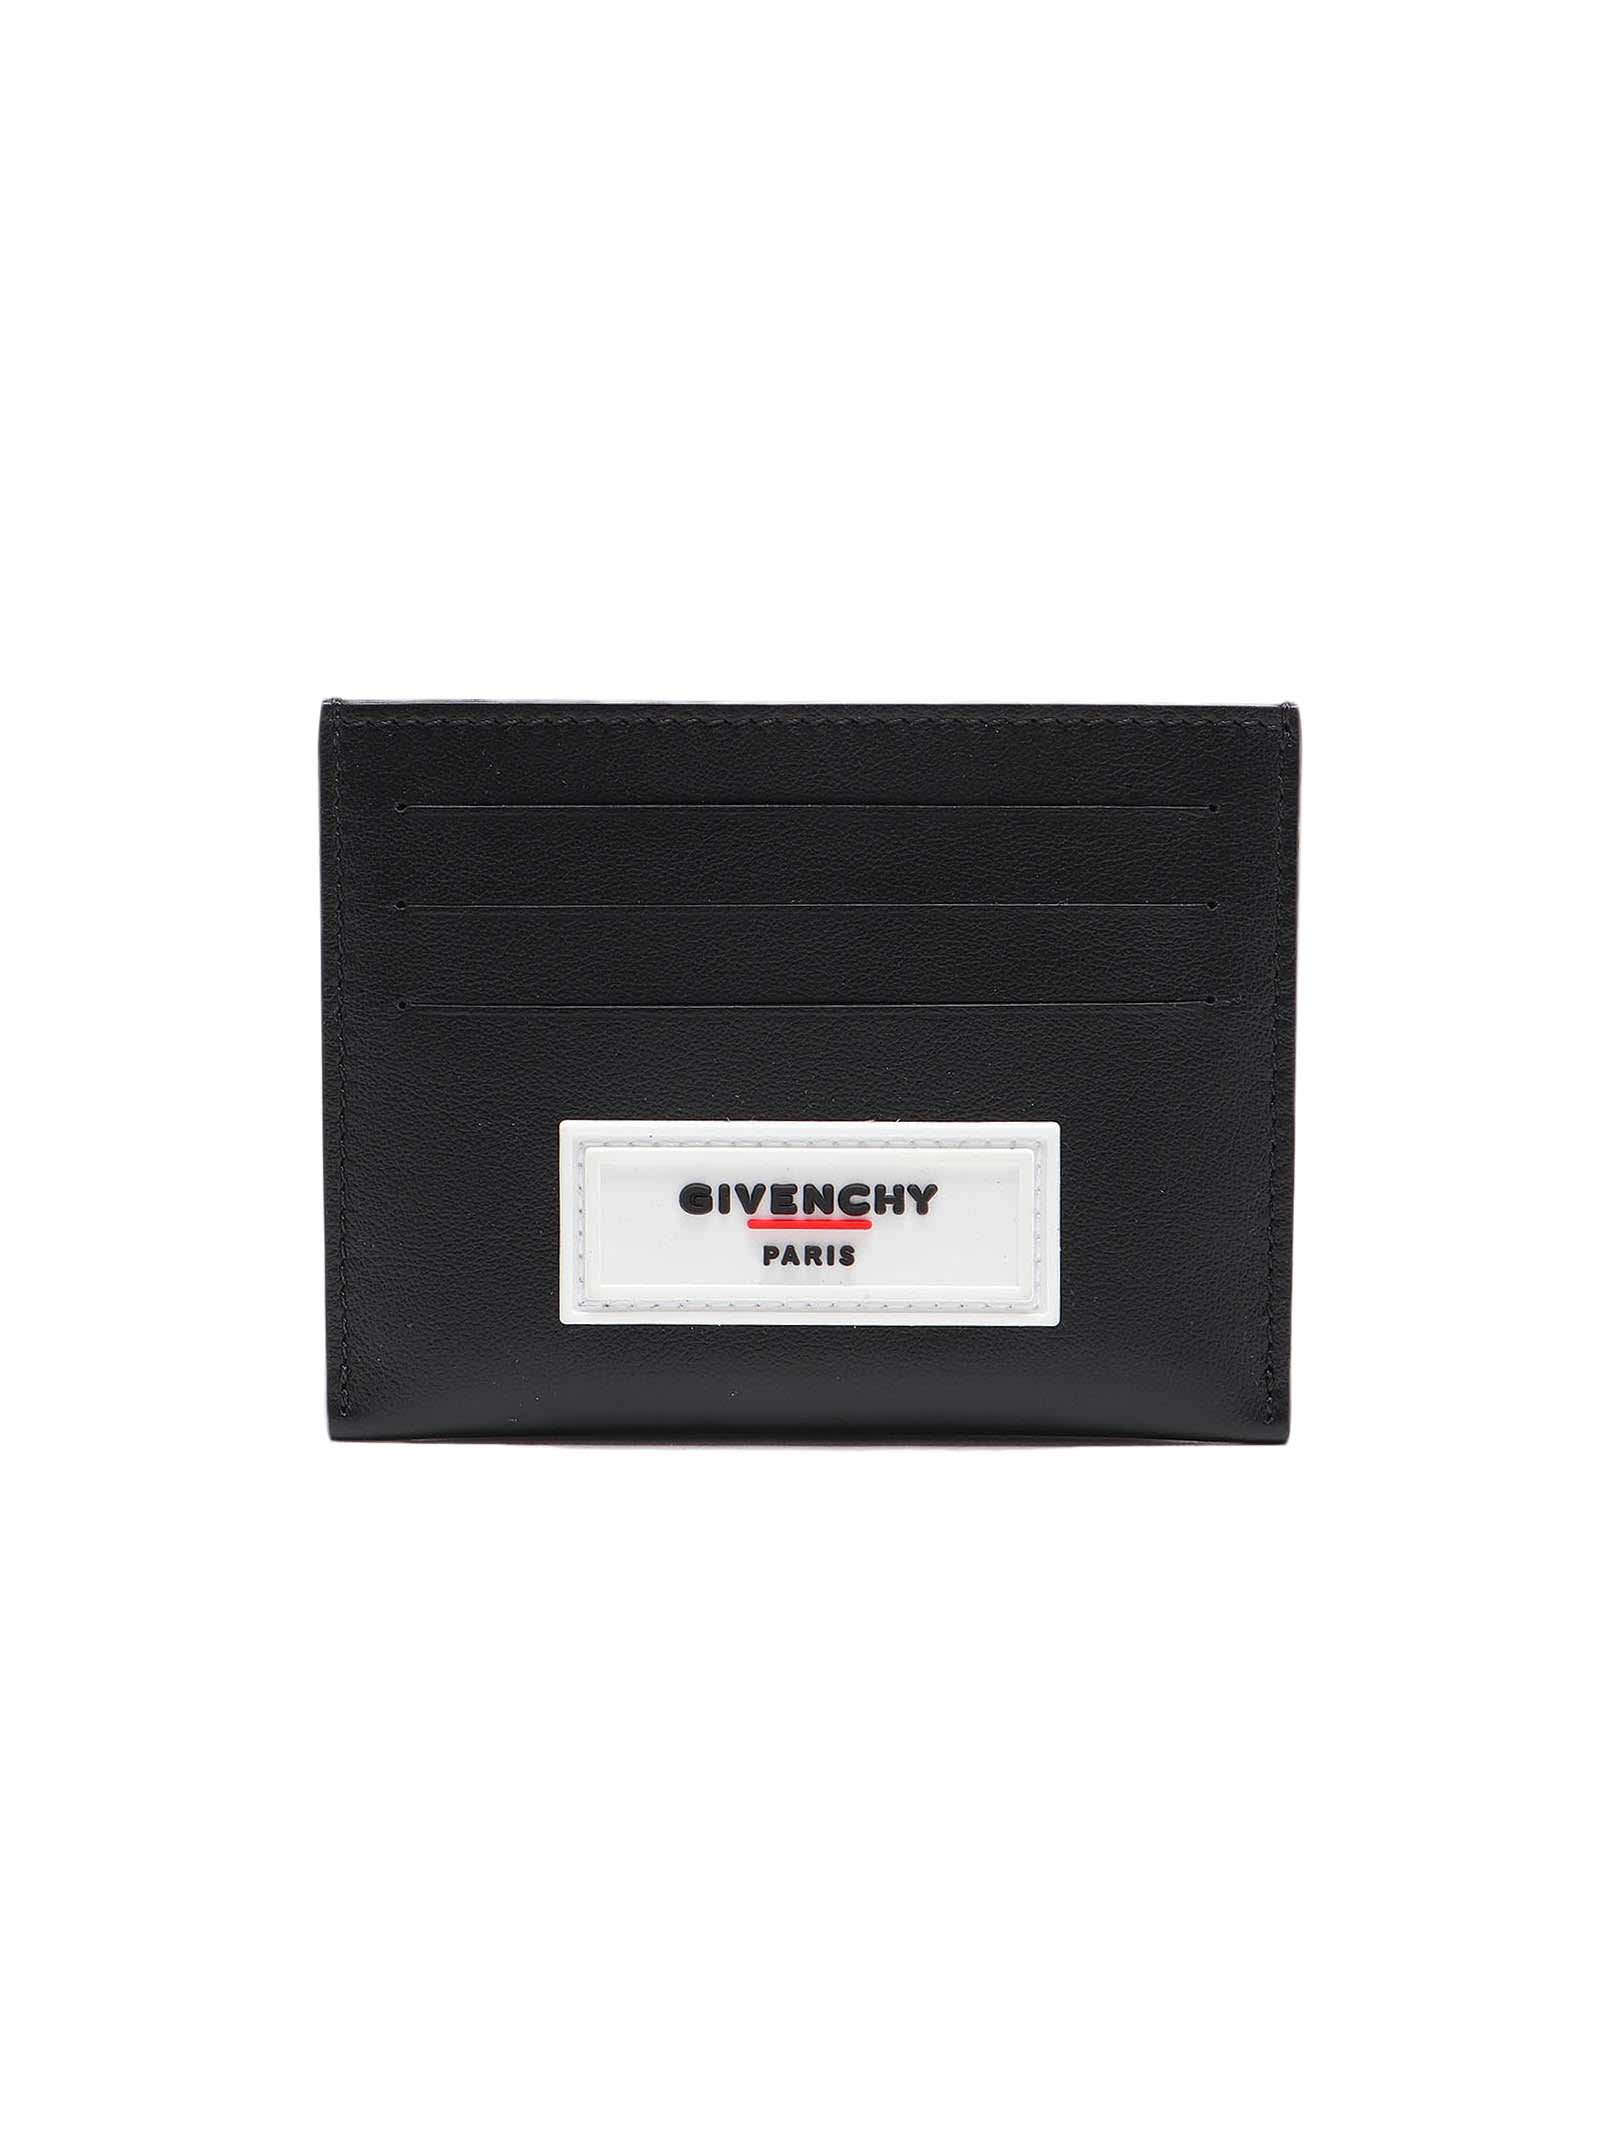 Givenchy Card Holder 3cc In Black/white